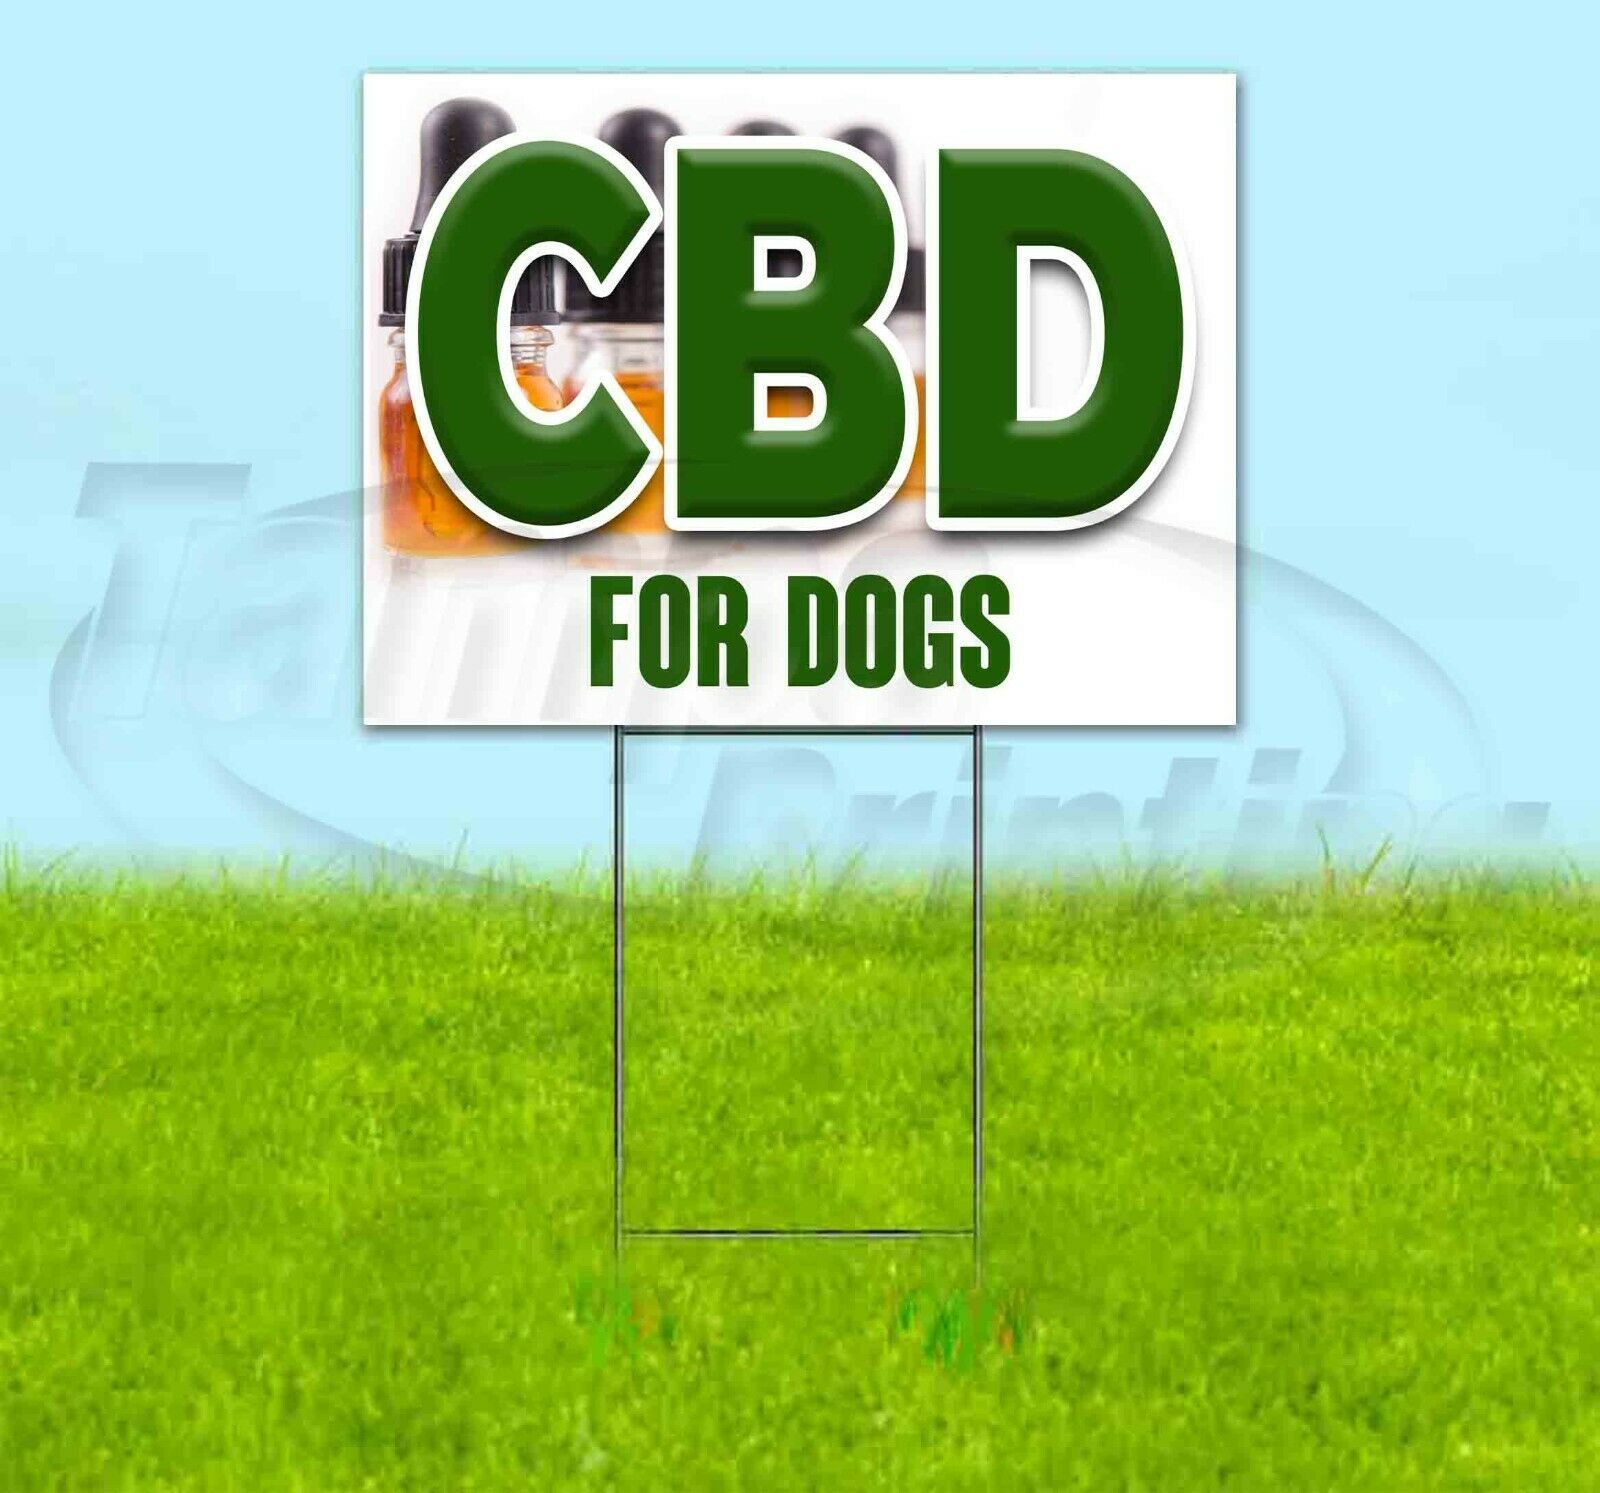 Primary image for CBD FOR DOGS 18x24 Yard Sign Corrugated Plastic Bandit Lawn USA